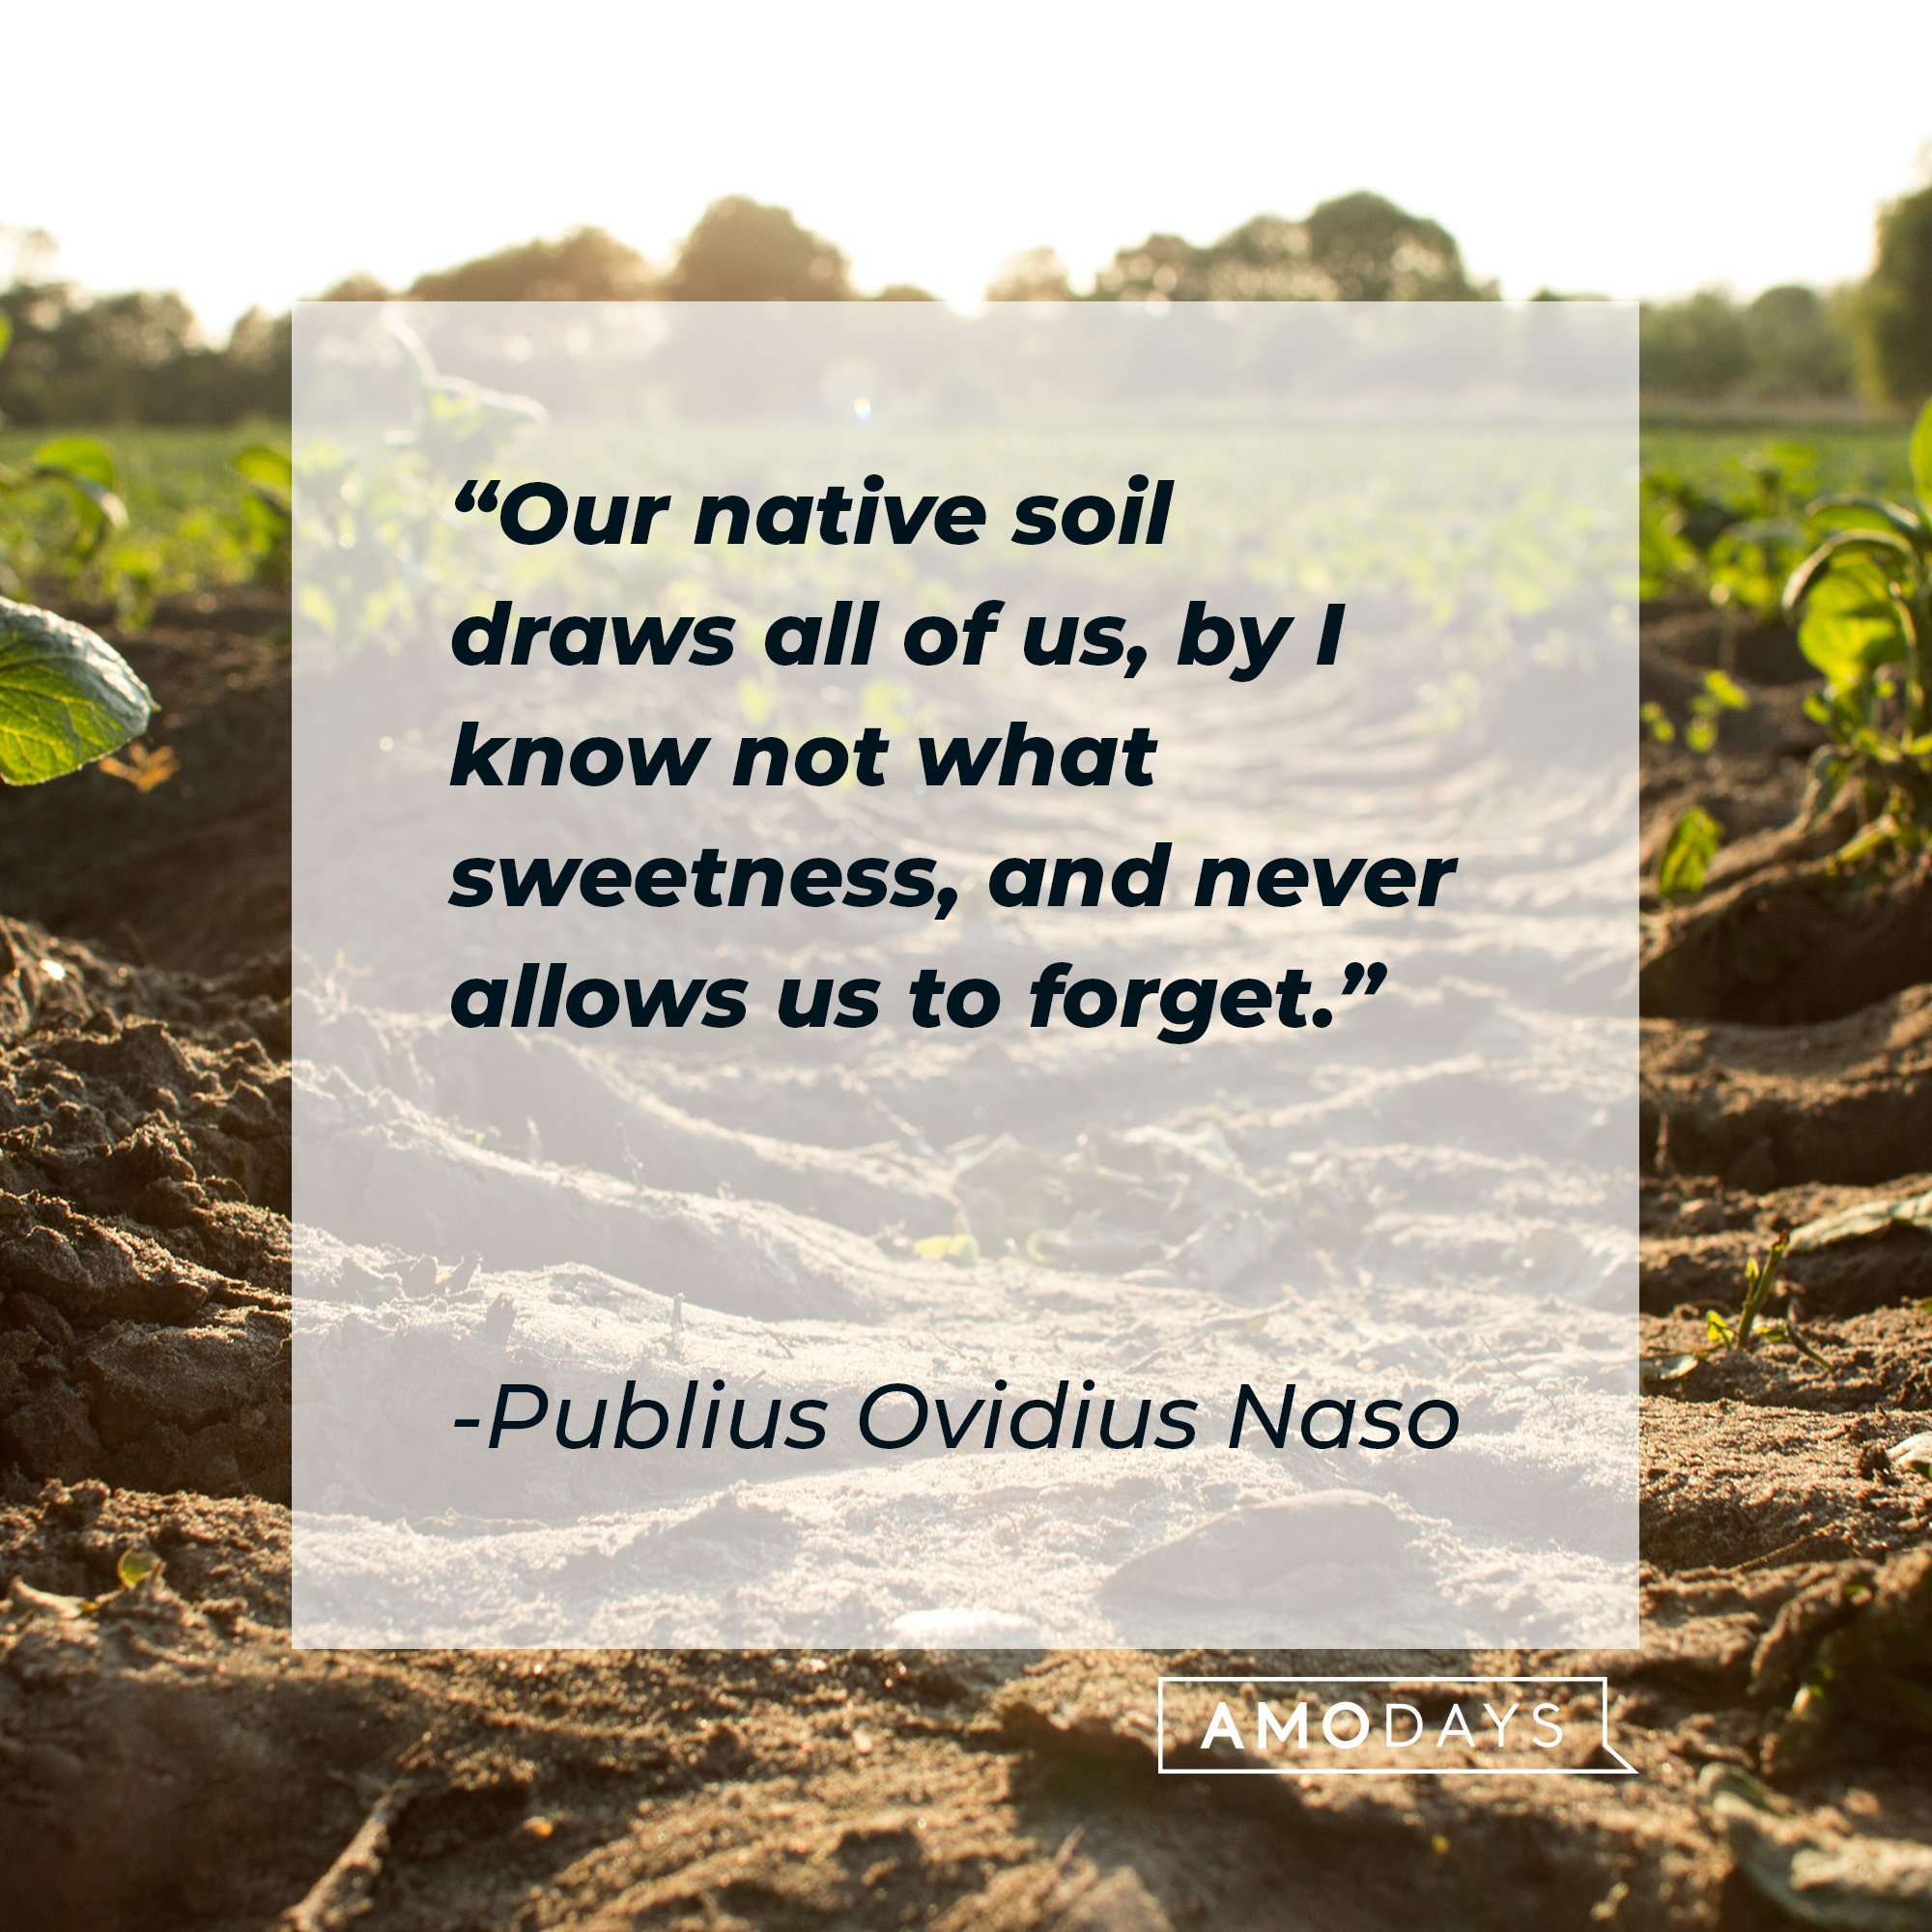 Publius Ovidius Naso's quote: "Our native soil draws all of us, by I know not what sweetness, and never allows us to forget." | Image: AmoDays